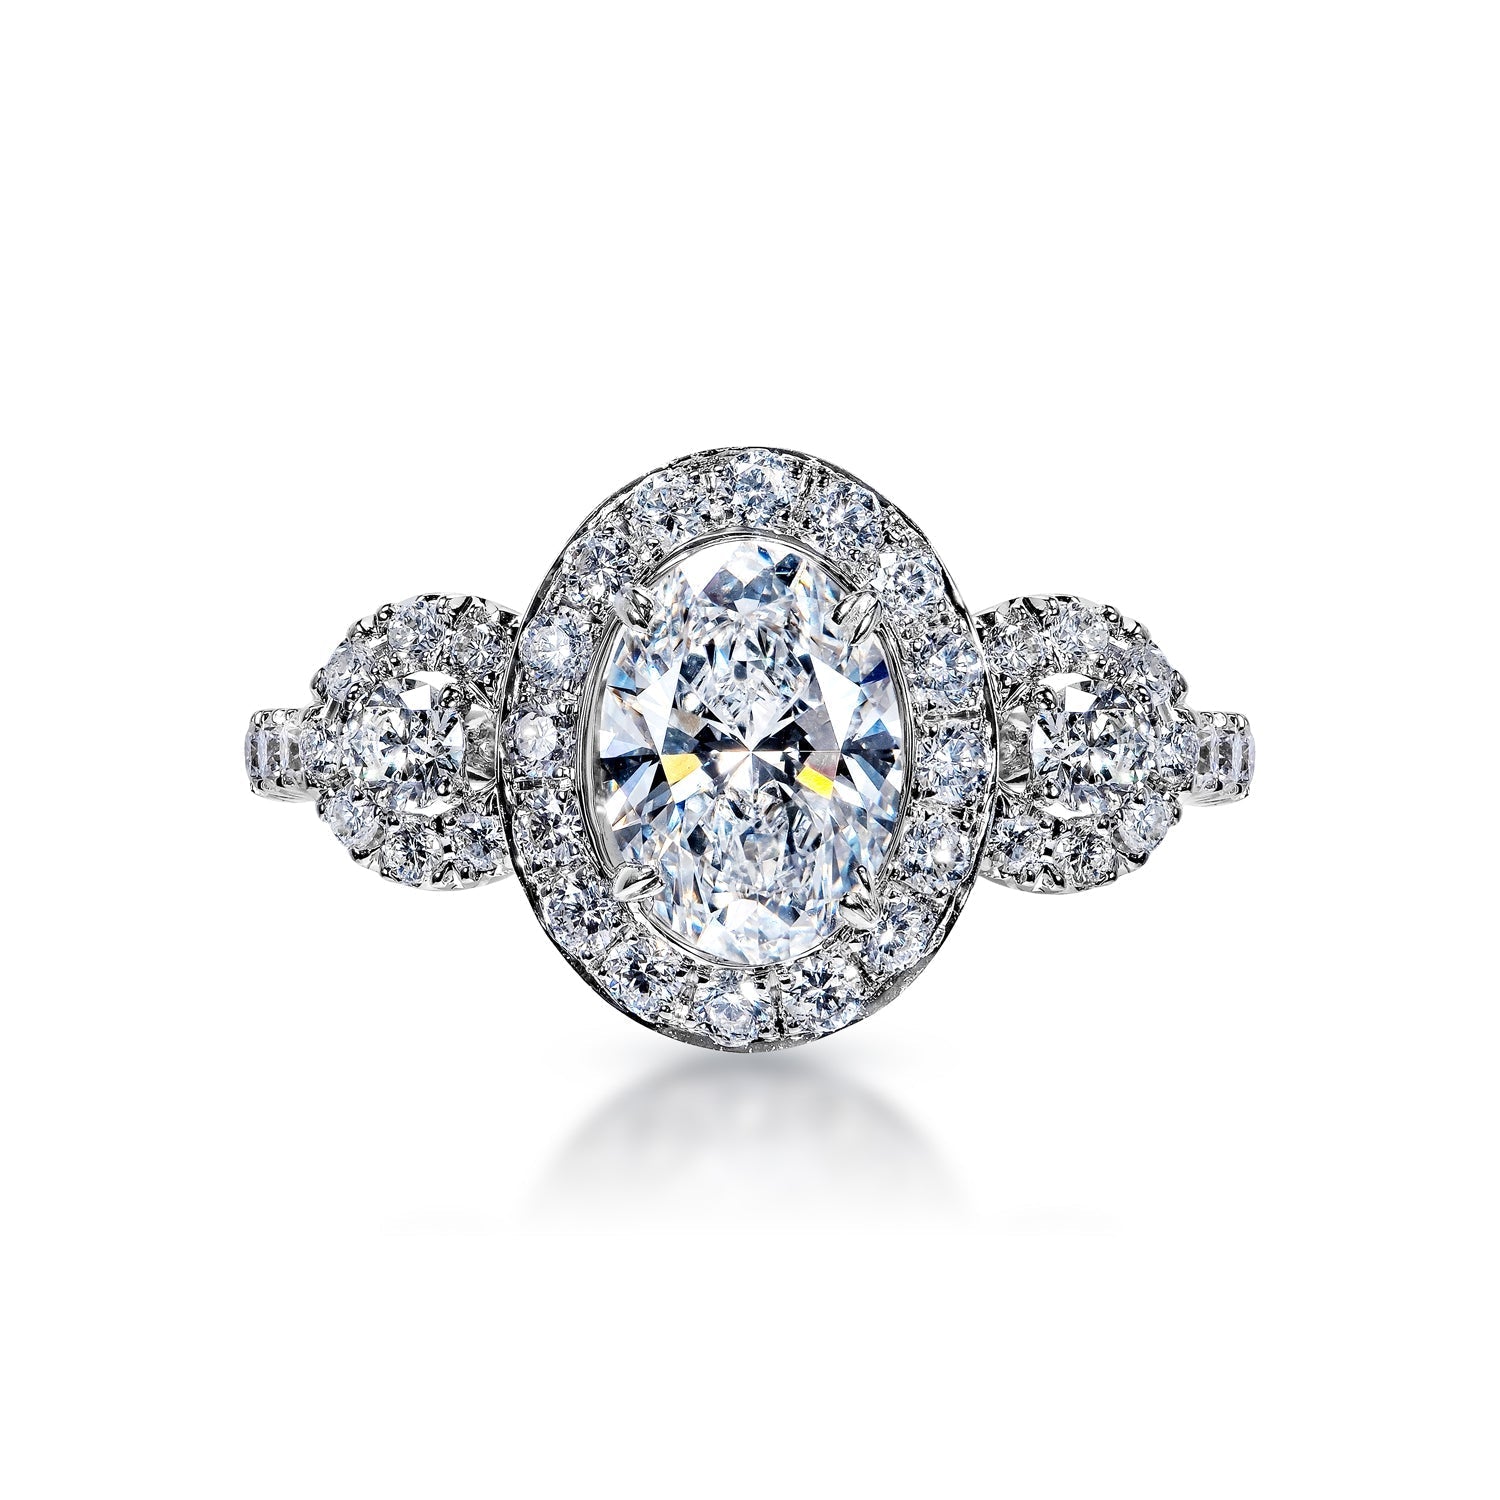 Ludie 2 Carat E VS1 Oval Cut Lab Grown Diamond Engagement Ring in 18k White Gold Front View